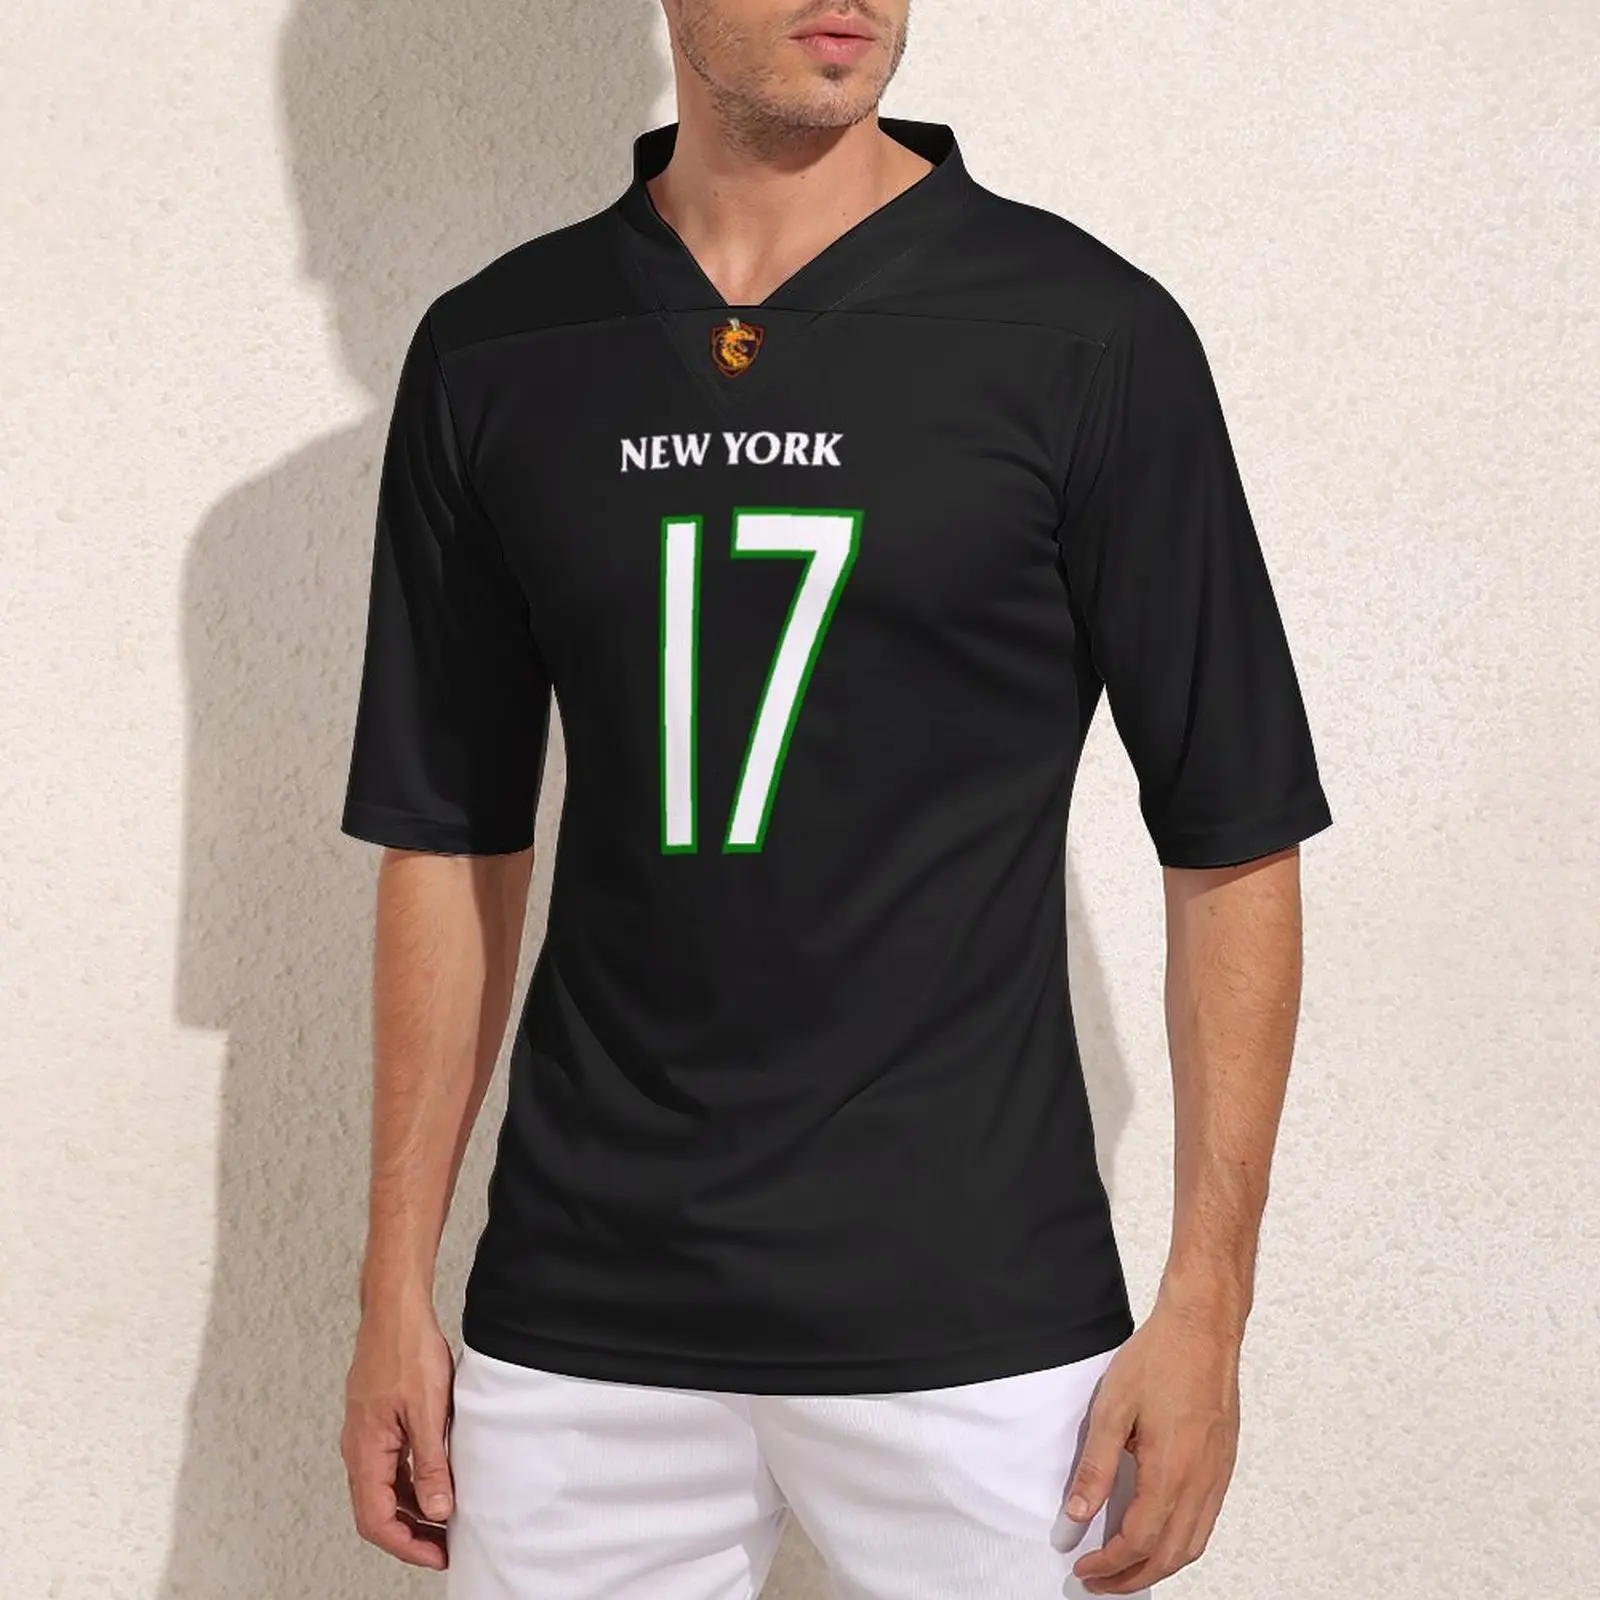 

Custom Made New York No 17 Black Rugby Jersey Stylish Personalized Football Jerseys Exercise Teens Football Shirts